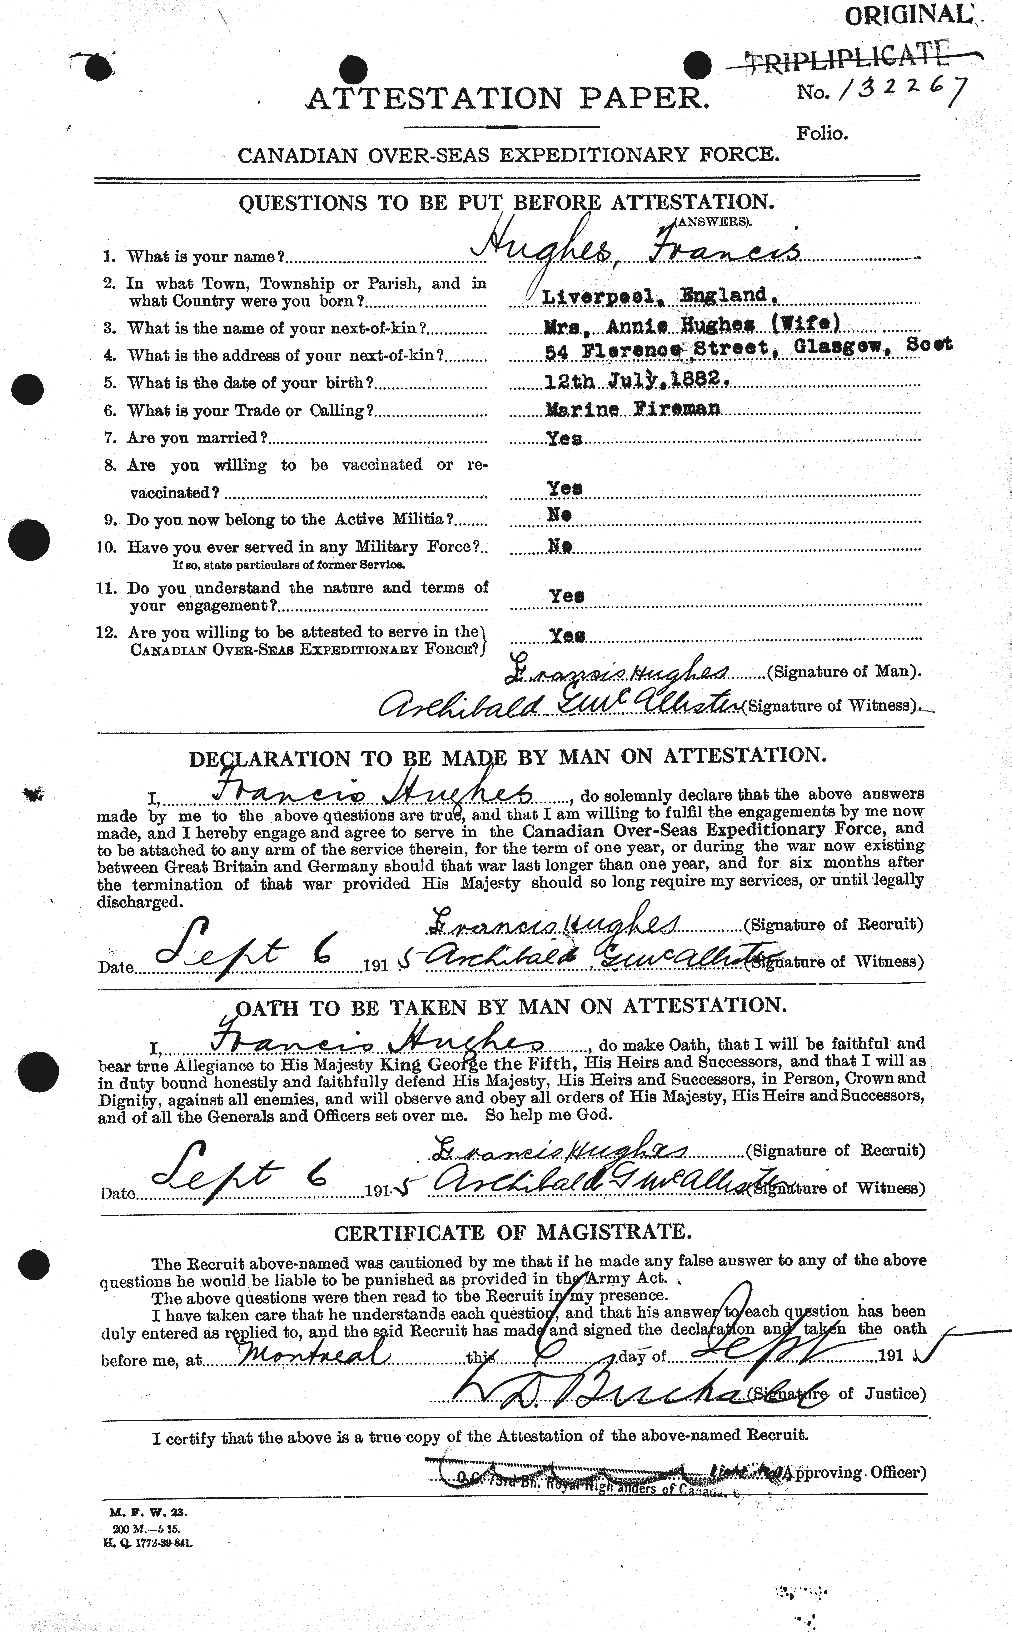 Personnel Records of the First World War - CEF 403764a